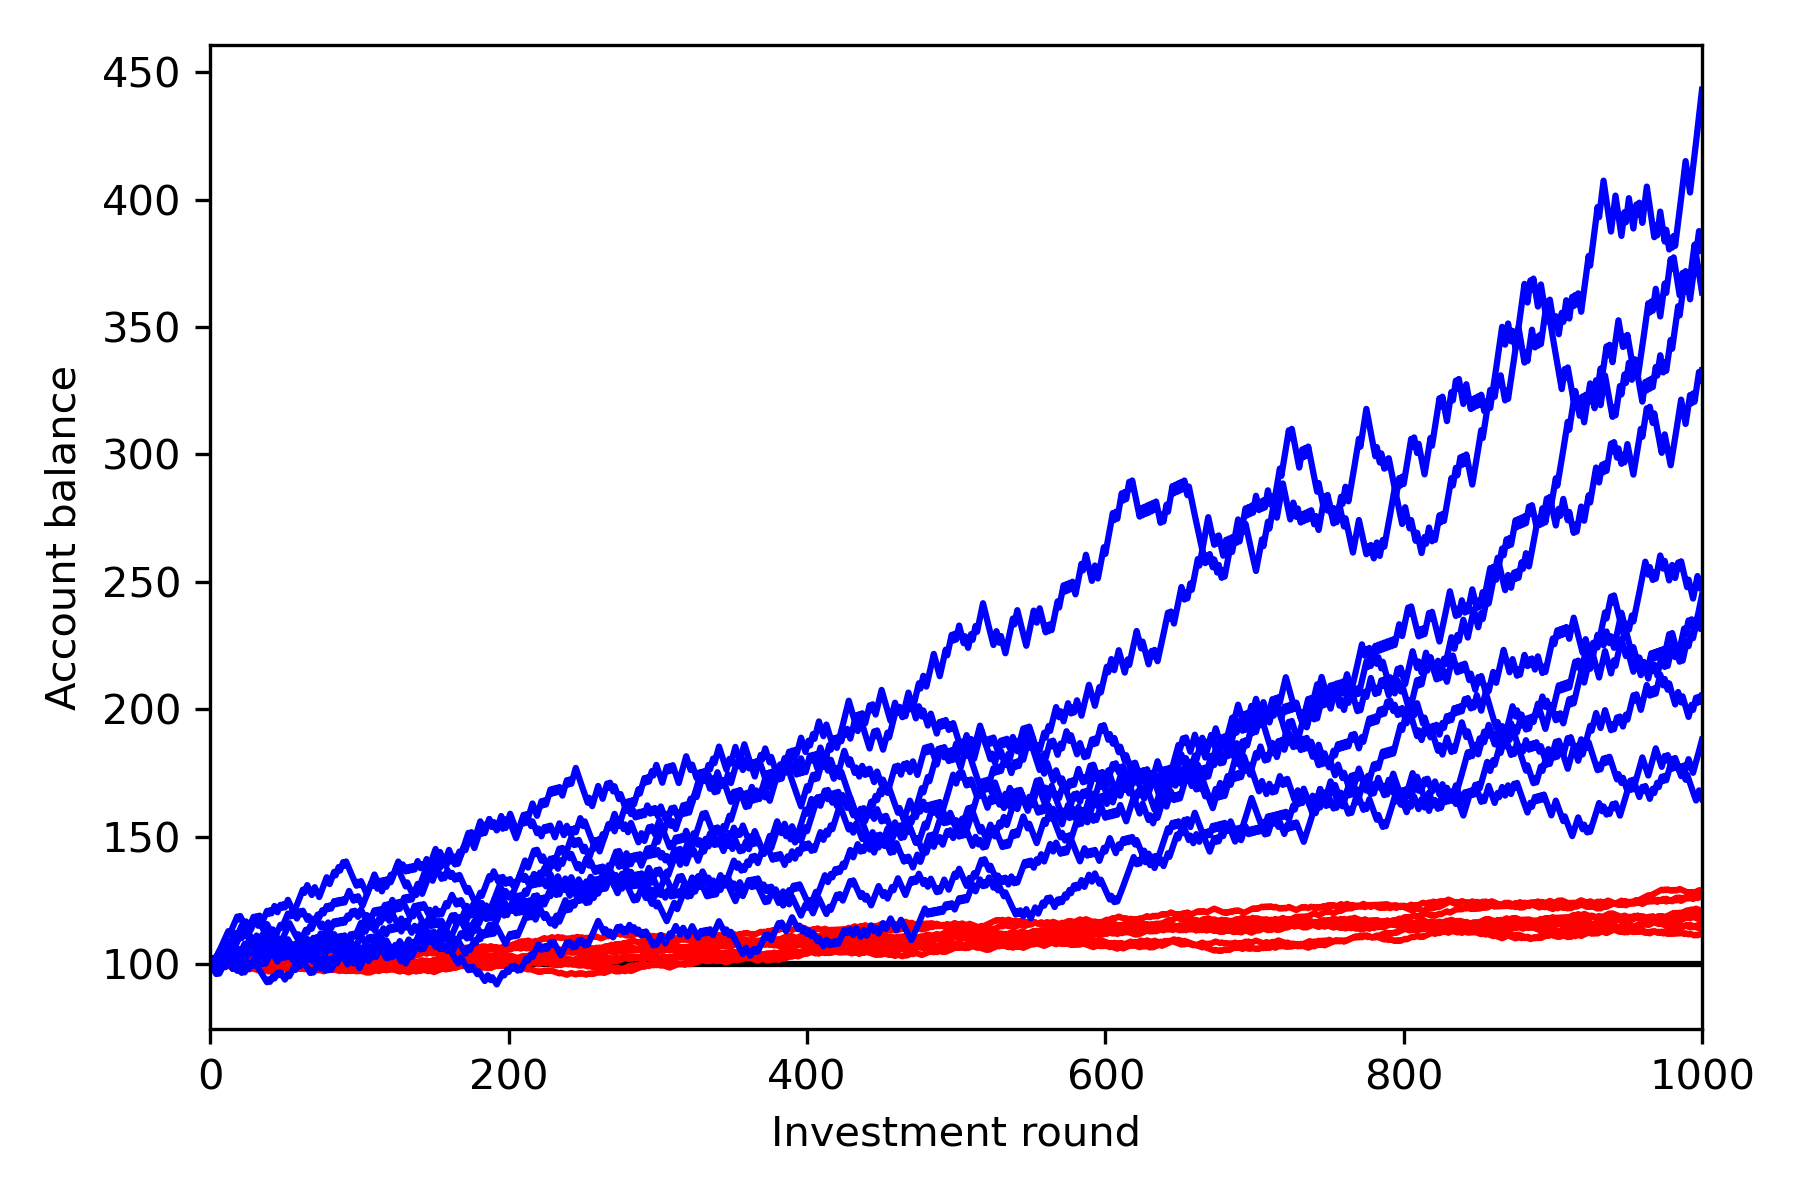 Monte Carlo simulations of an investment strategy